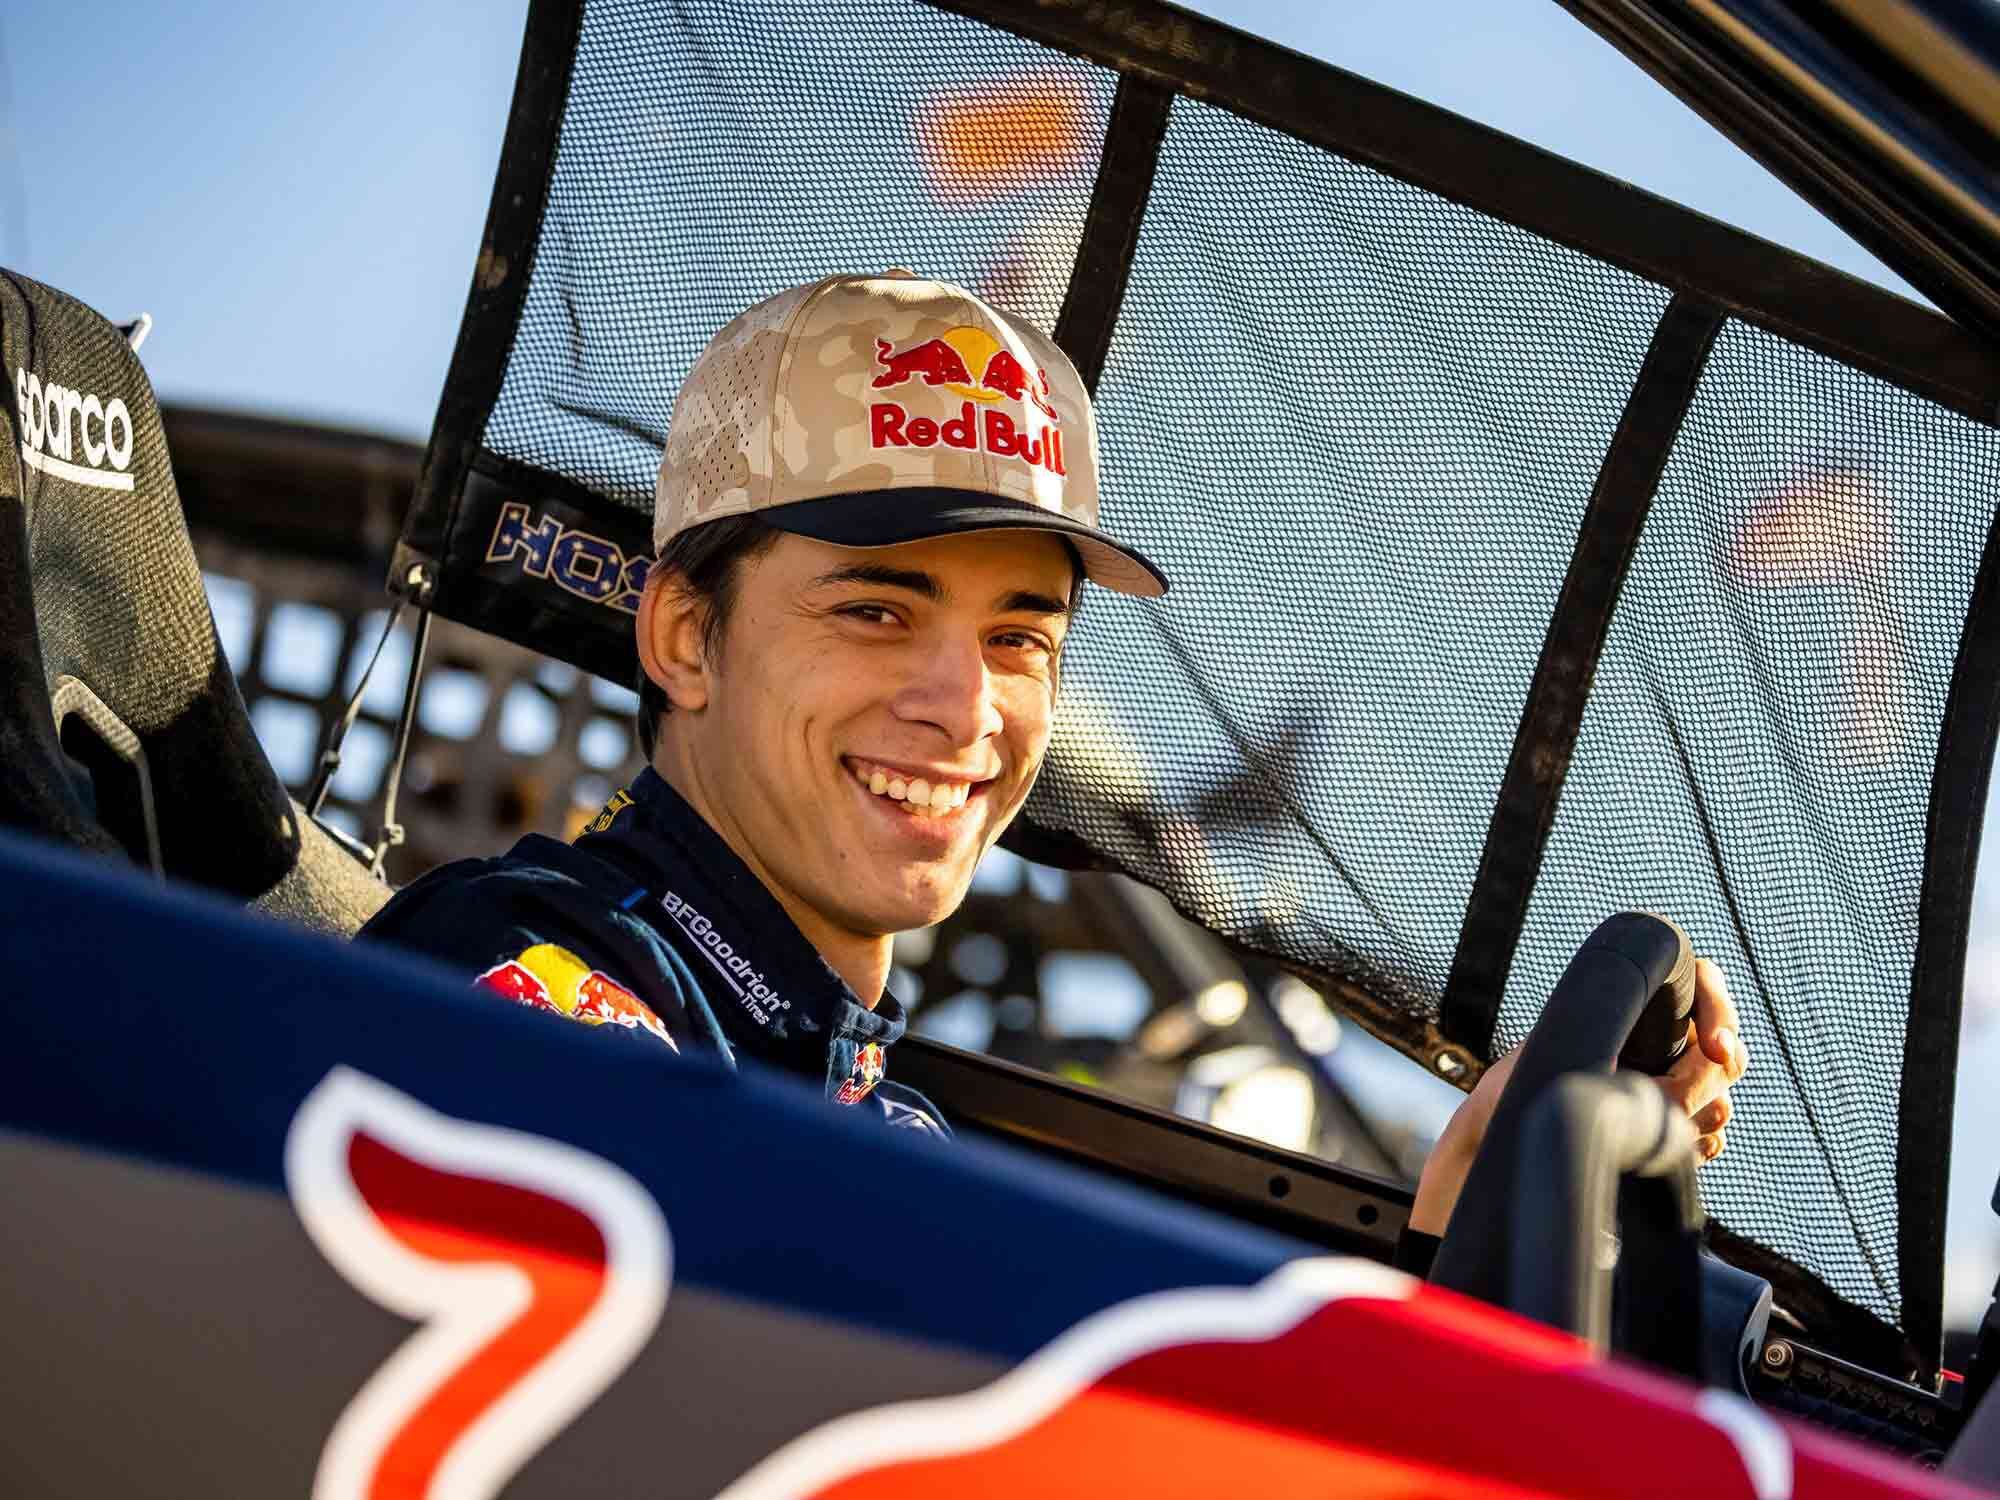 In just his second Dakar Rally, Quintero has been through enough success and heartache for someone in his 20th rally. And he’s just getting going.